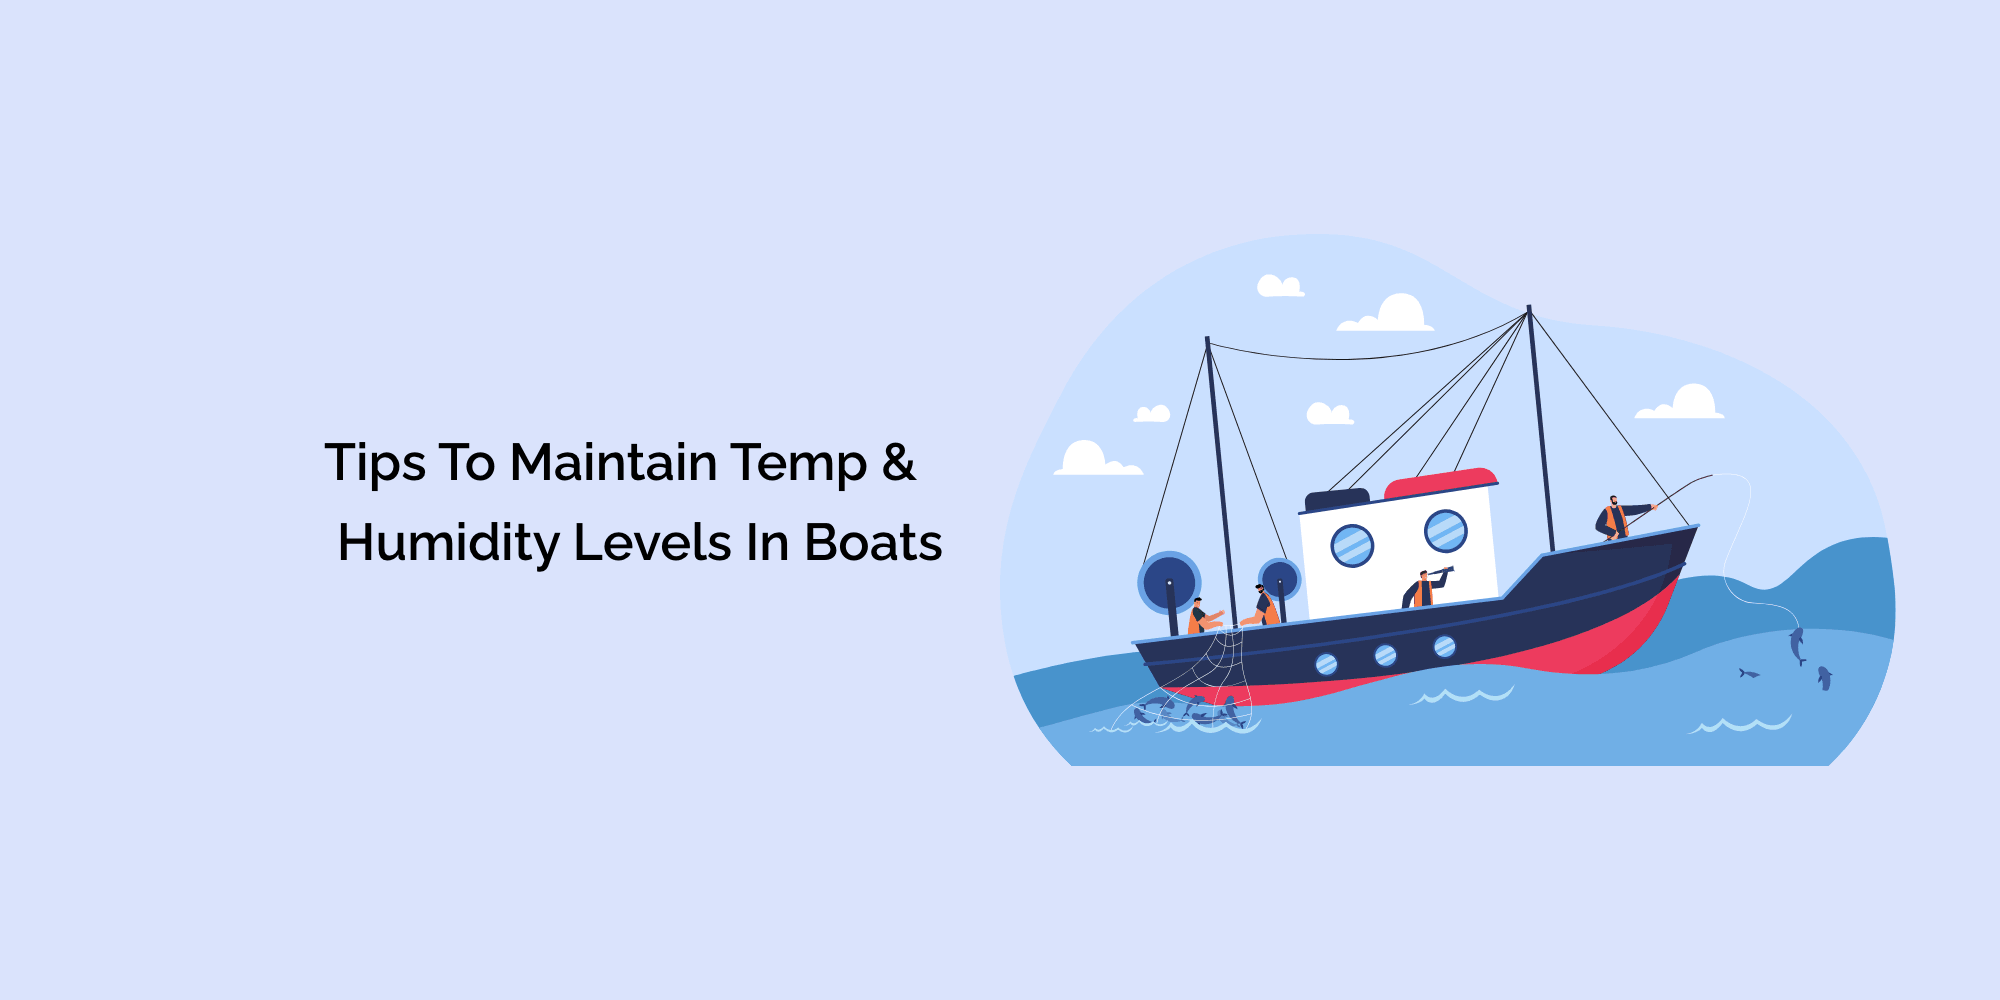 Tips to maintain temp and humidity levels in boats